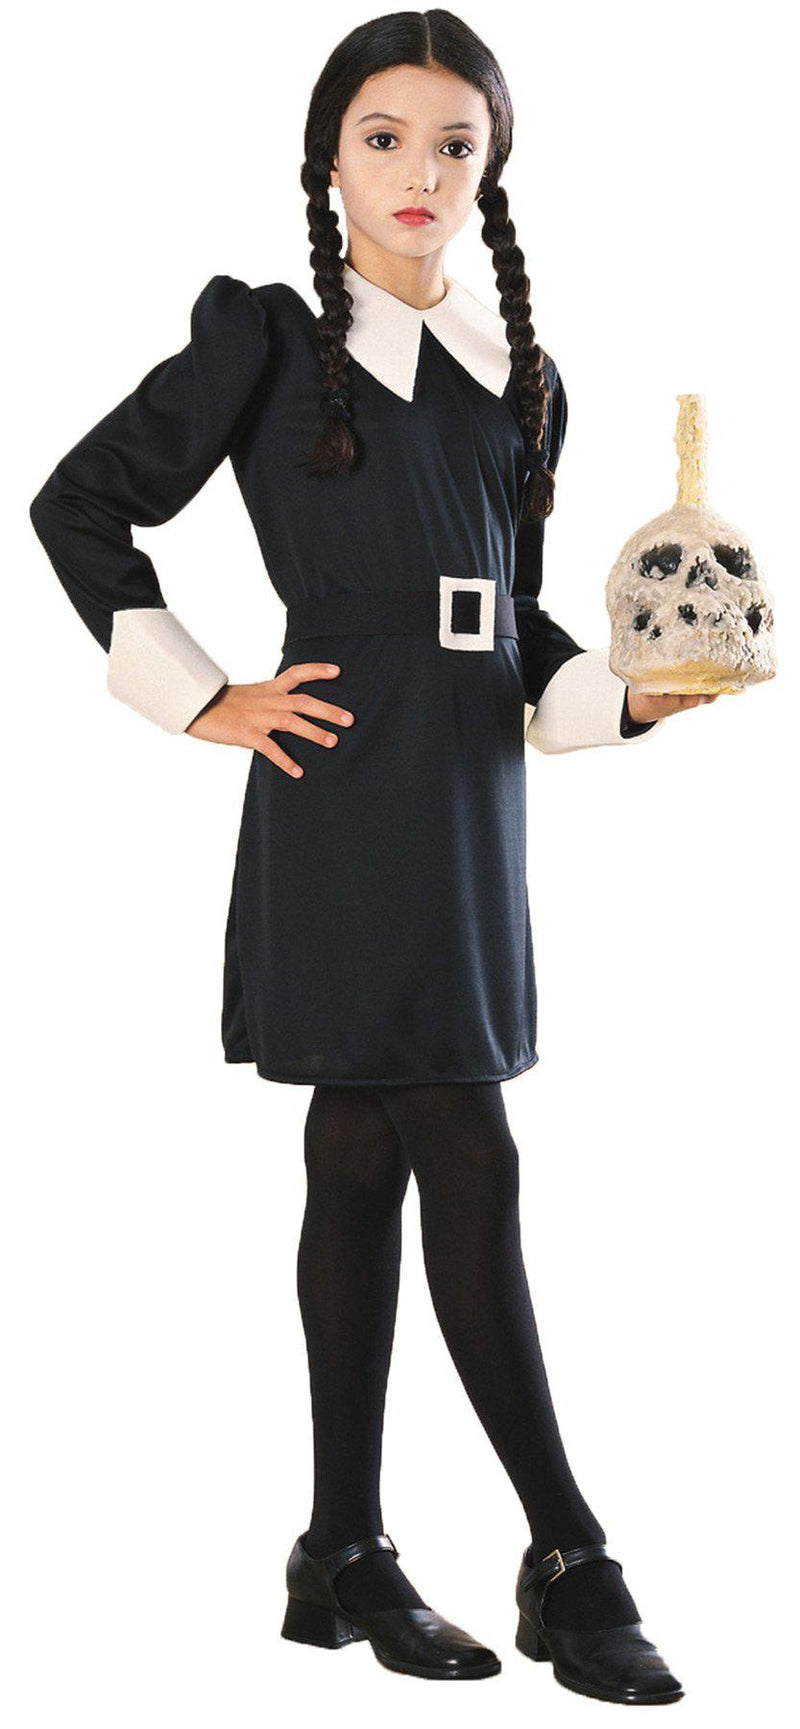 THE ADDAMS FAMILY - Wednesday Child's Costume-Costume-Classic Horror Shop